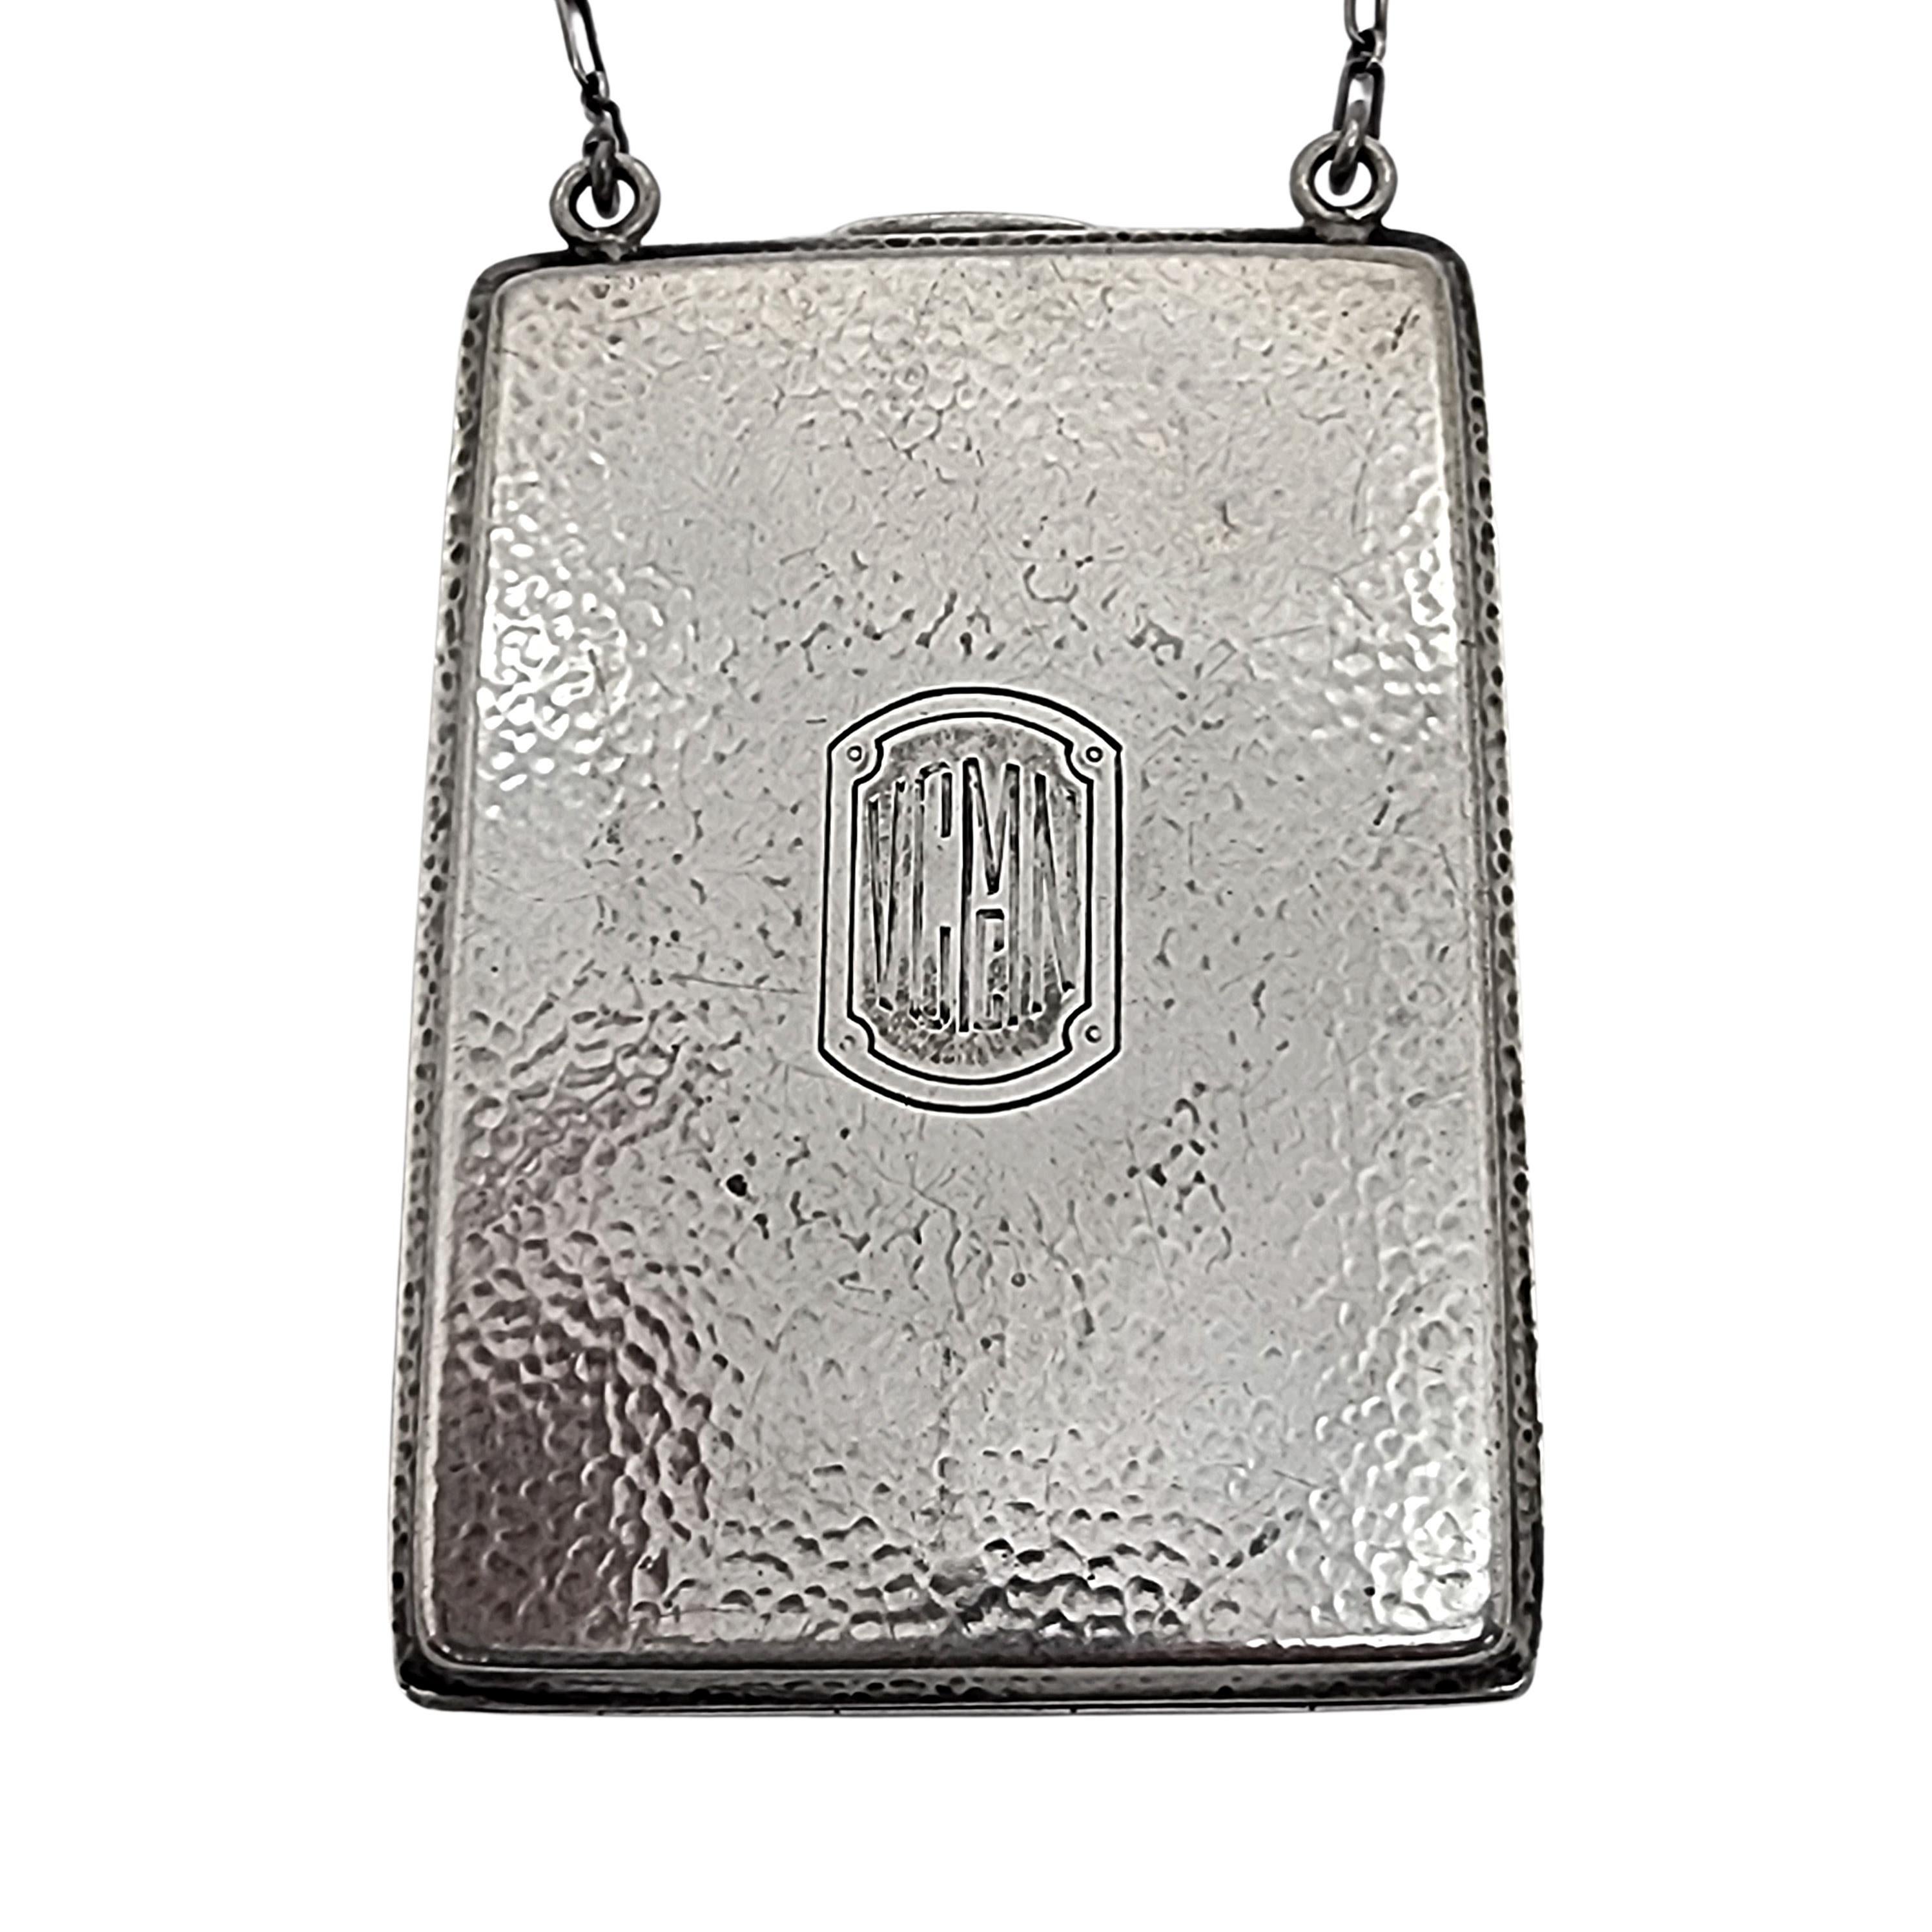 sterling silver coin compact purse, pattern # 7043, by R Blackinton & Co with monogram.

Monogram appears to be VCMcN

Beautiful simple, classic and timeless hammered design with a chain strap. Cartouche with monogram on the front. Push button